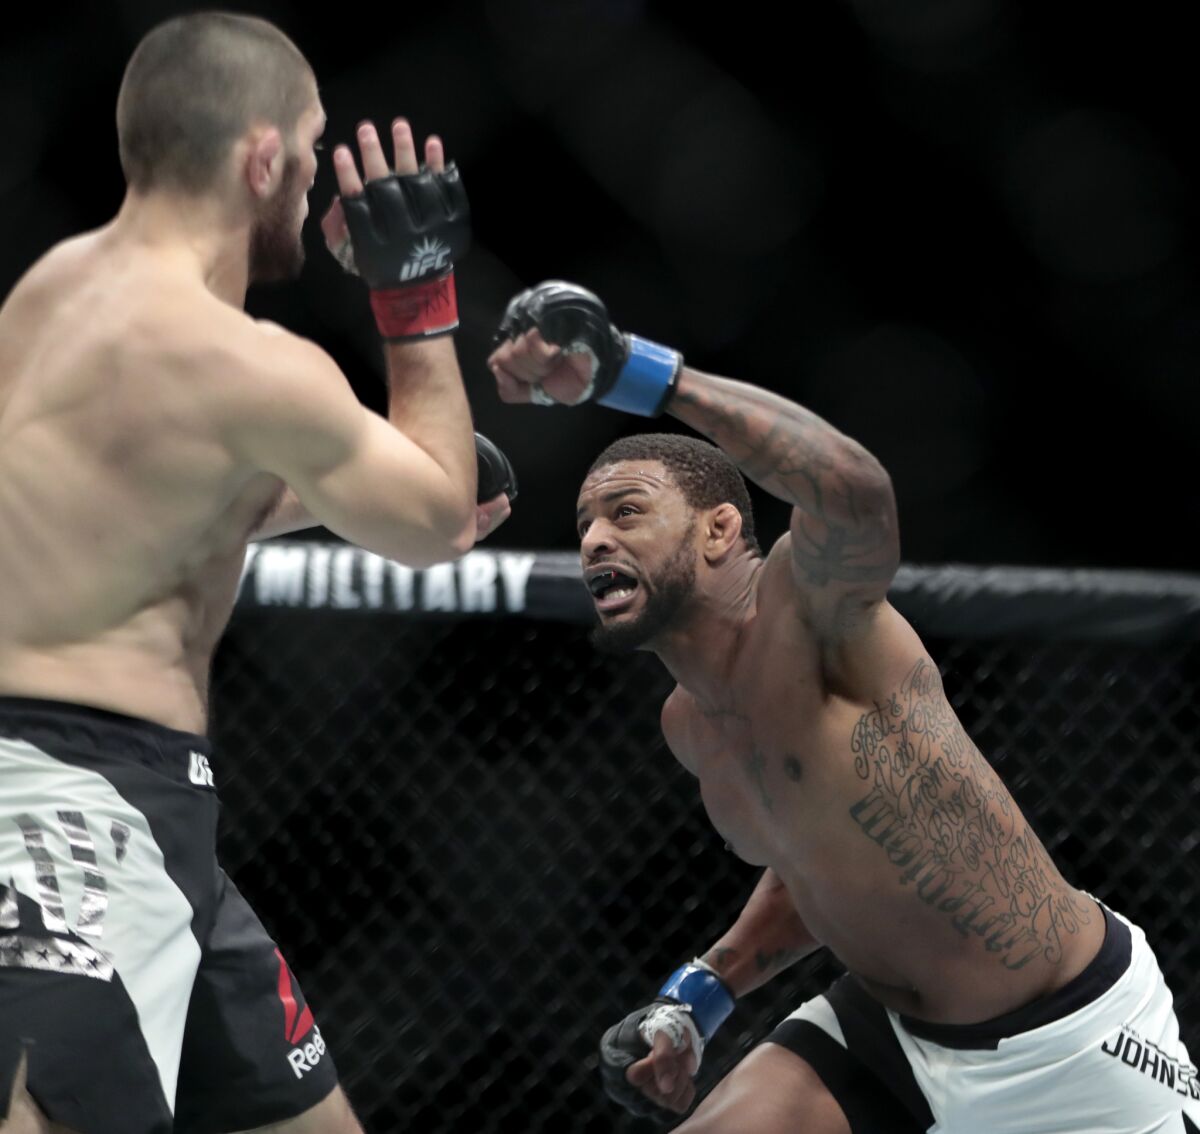 Michael Johnson lunges forward, leading with his left hand, during a lightweight bout against Khabib Nurmagomedov at UFC 205.